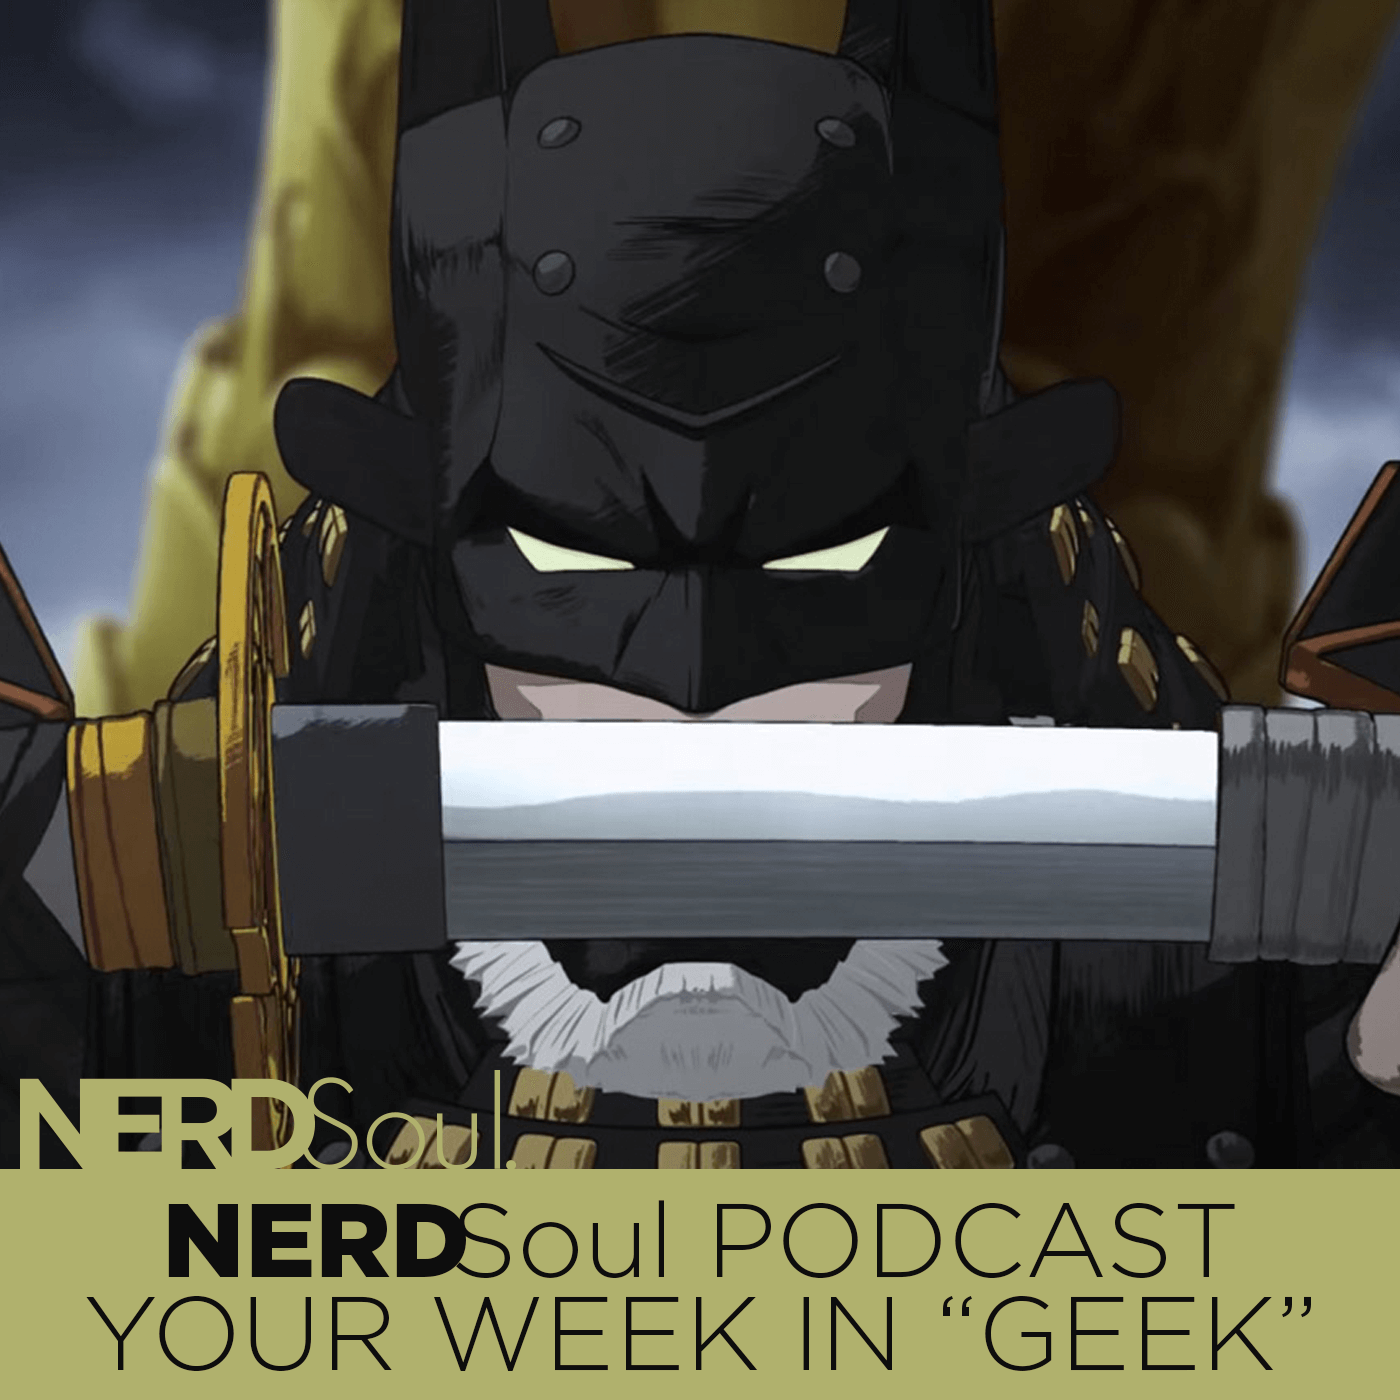 DC's Batman Ninja Anime Trailer, Marvel's Runaways Reaction, The CW Crisis on Earth-X, Avengers: Infinity War Official Trailer Review & More! | NERDSoul • Your Week in Geek